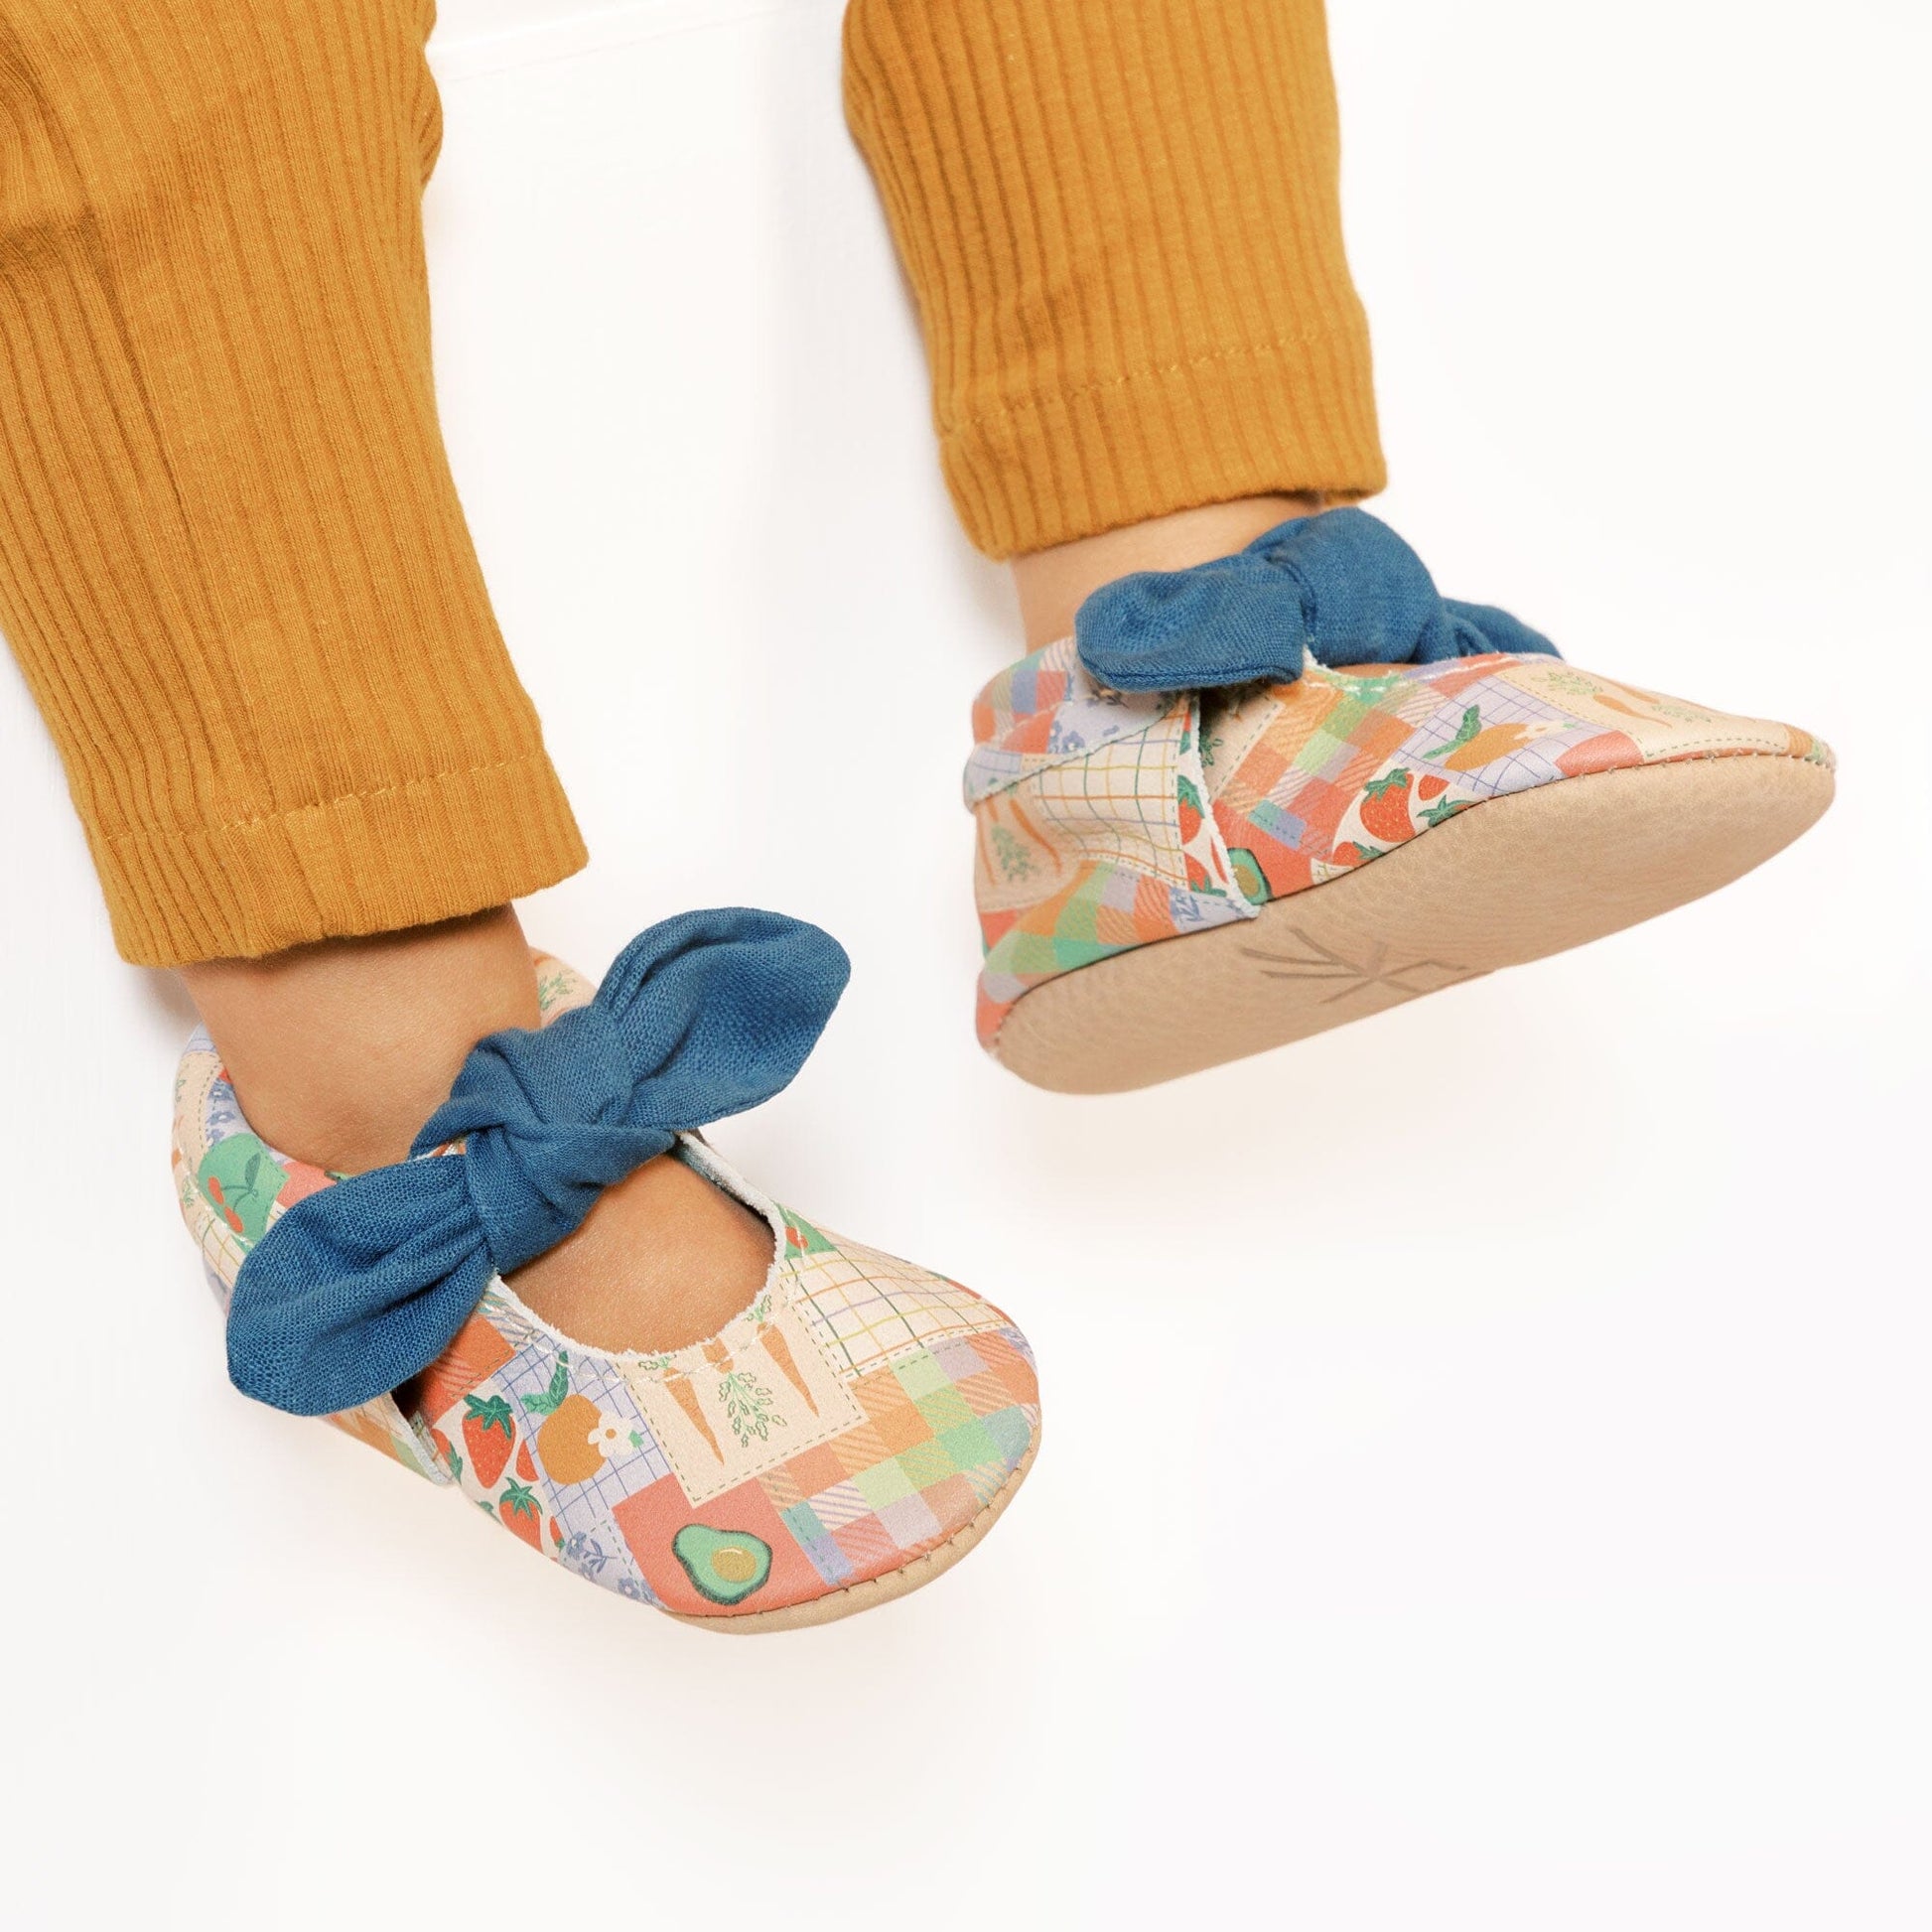 Patchwork Knotted Bow Baby Shoe Knotted Bow Mocc Soft Sole 